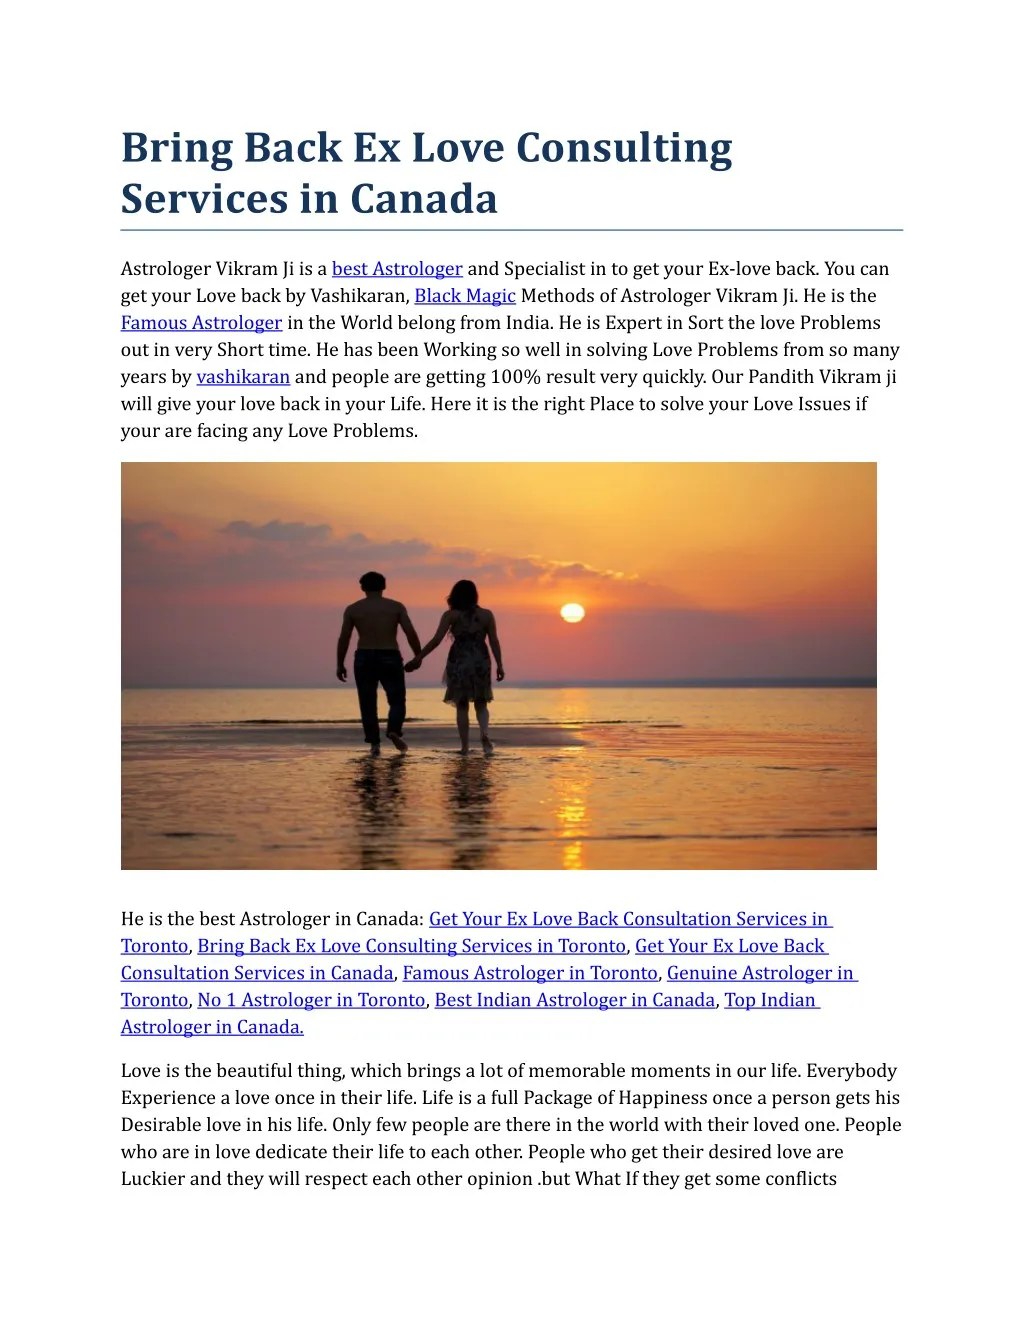 bring back ex love consulting services in canada